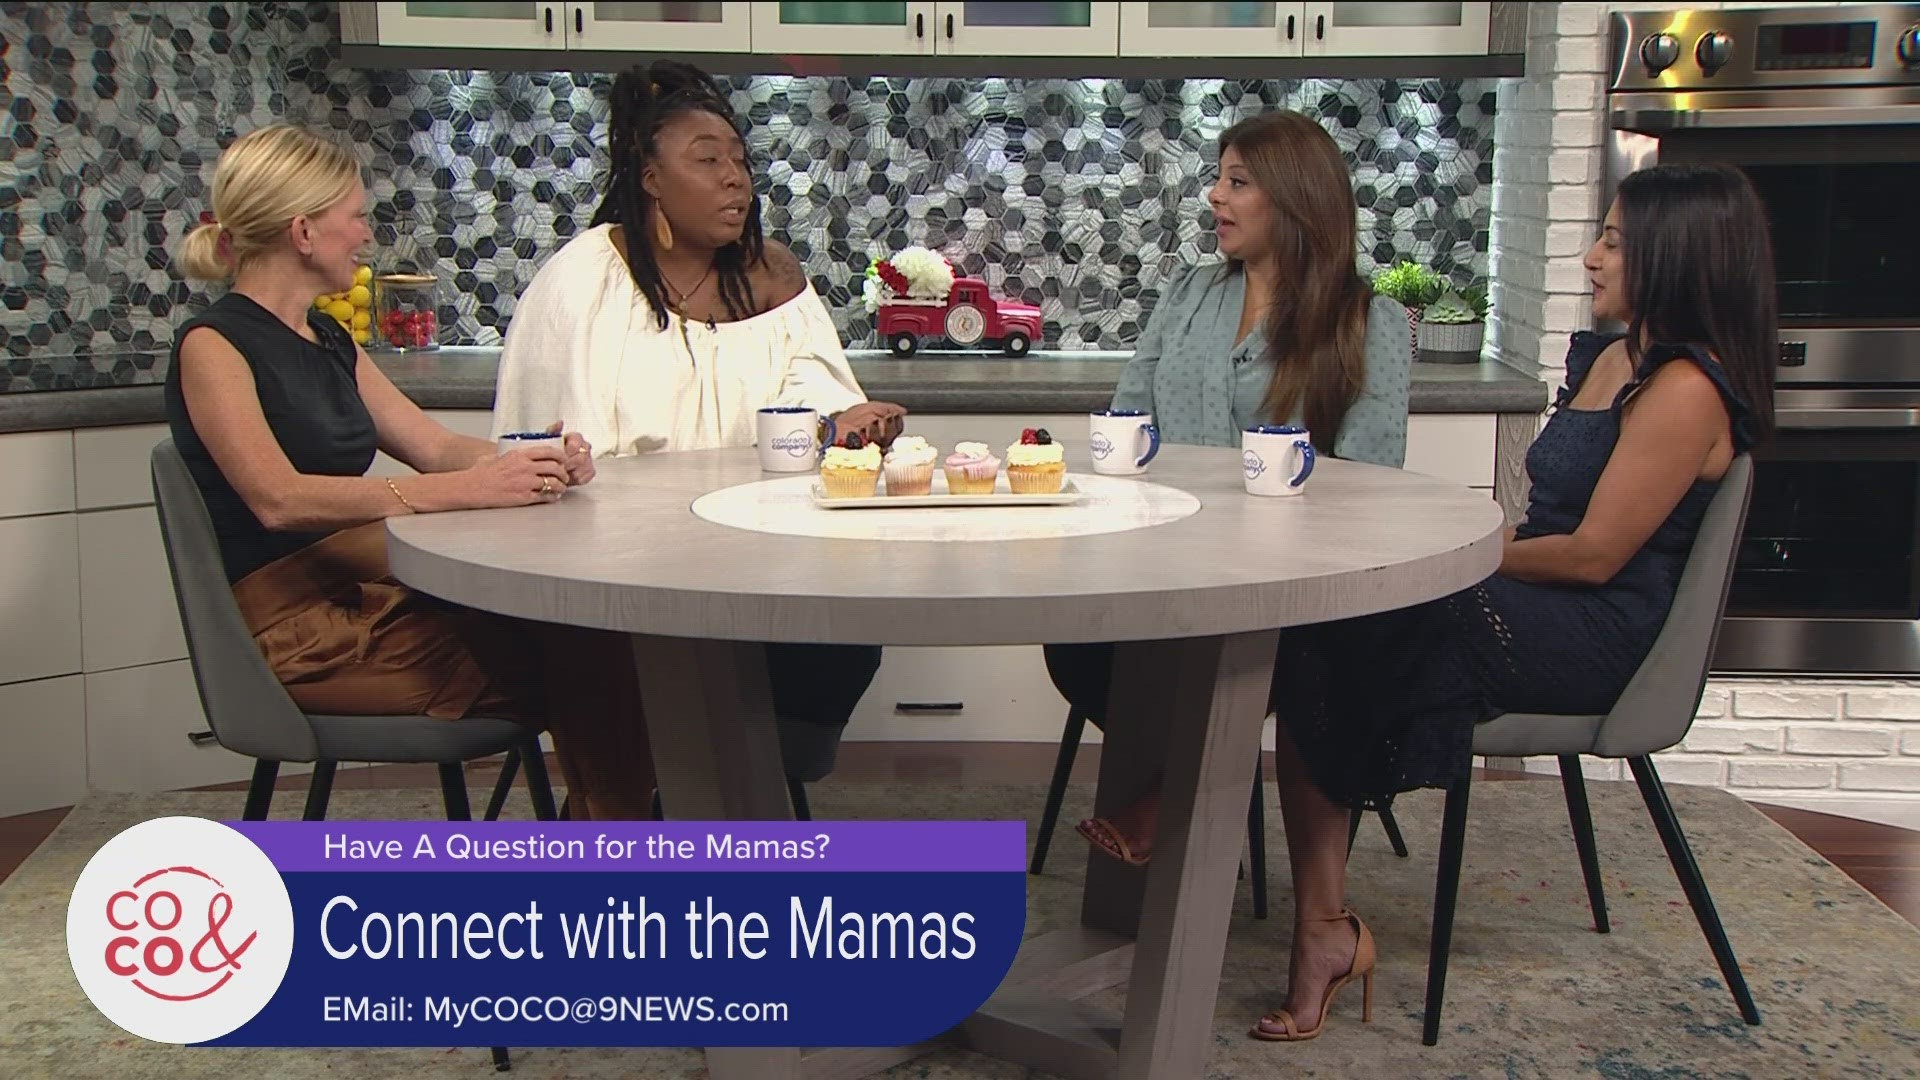 Send us your questions for the Mamas to tackle! Just email us at MyCOCO@9News.com.